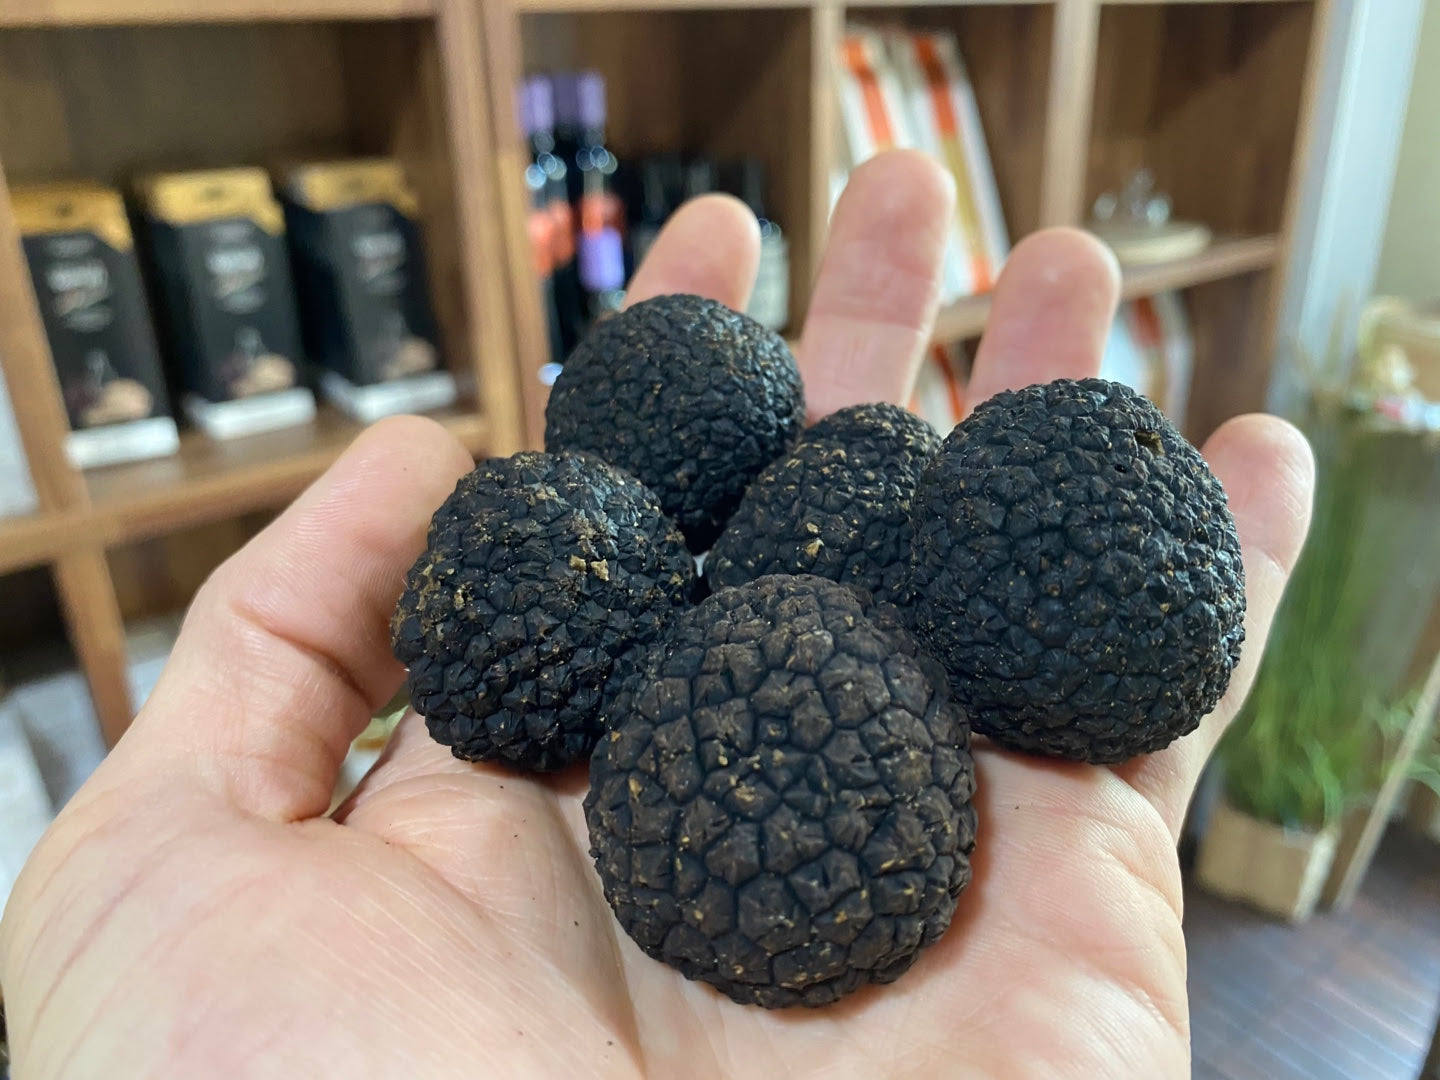 About burgundy truffles or autumn truffles – The story of burgundy truffles loved in Europe